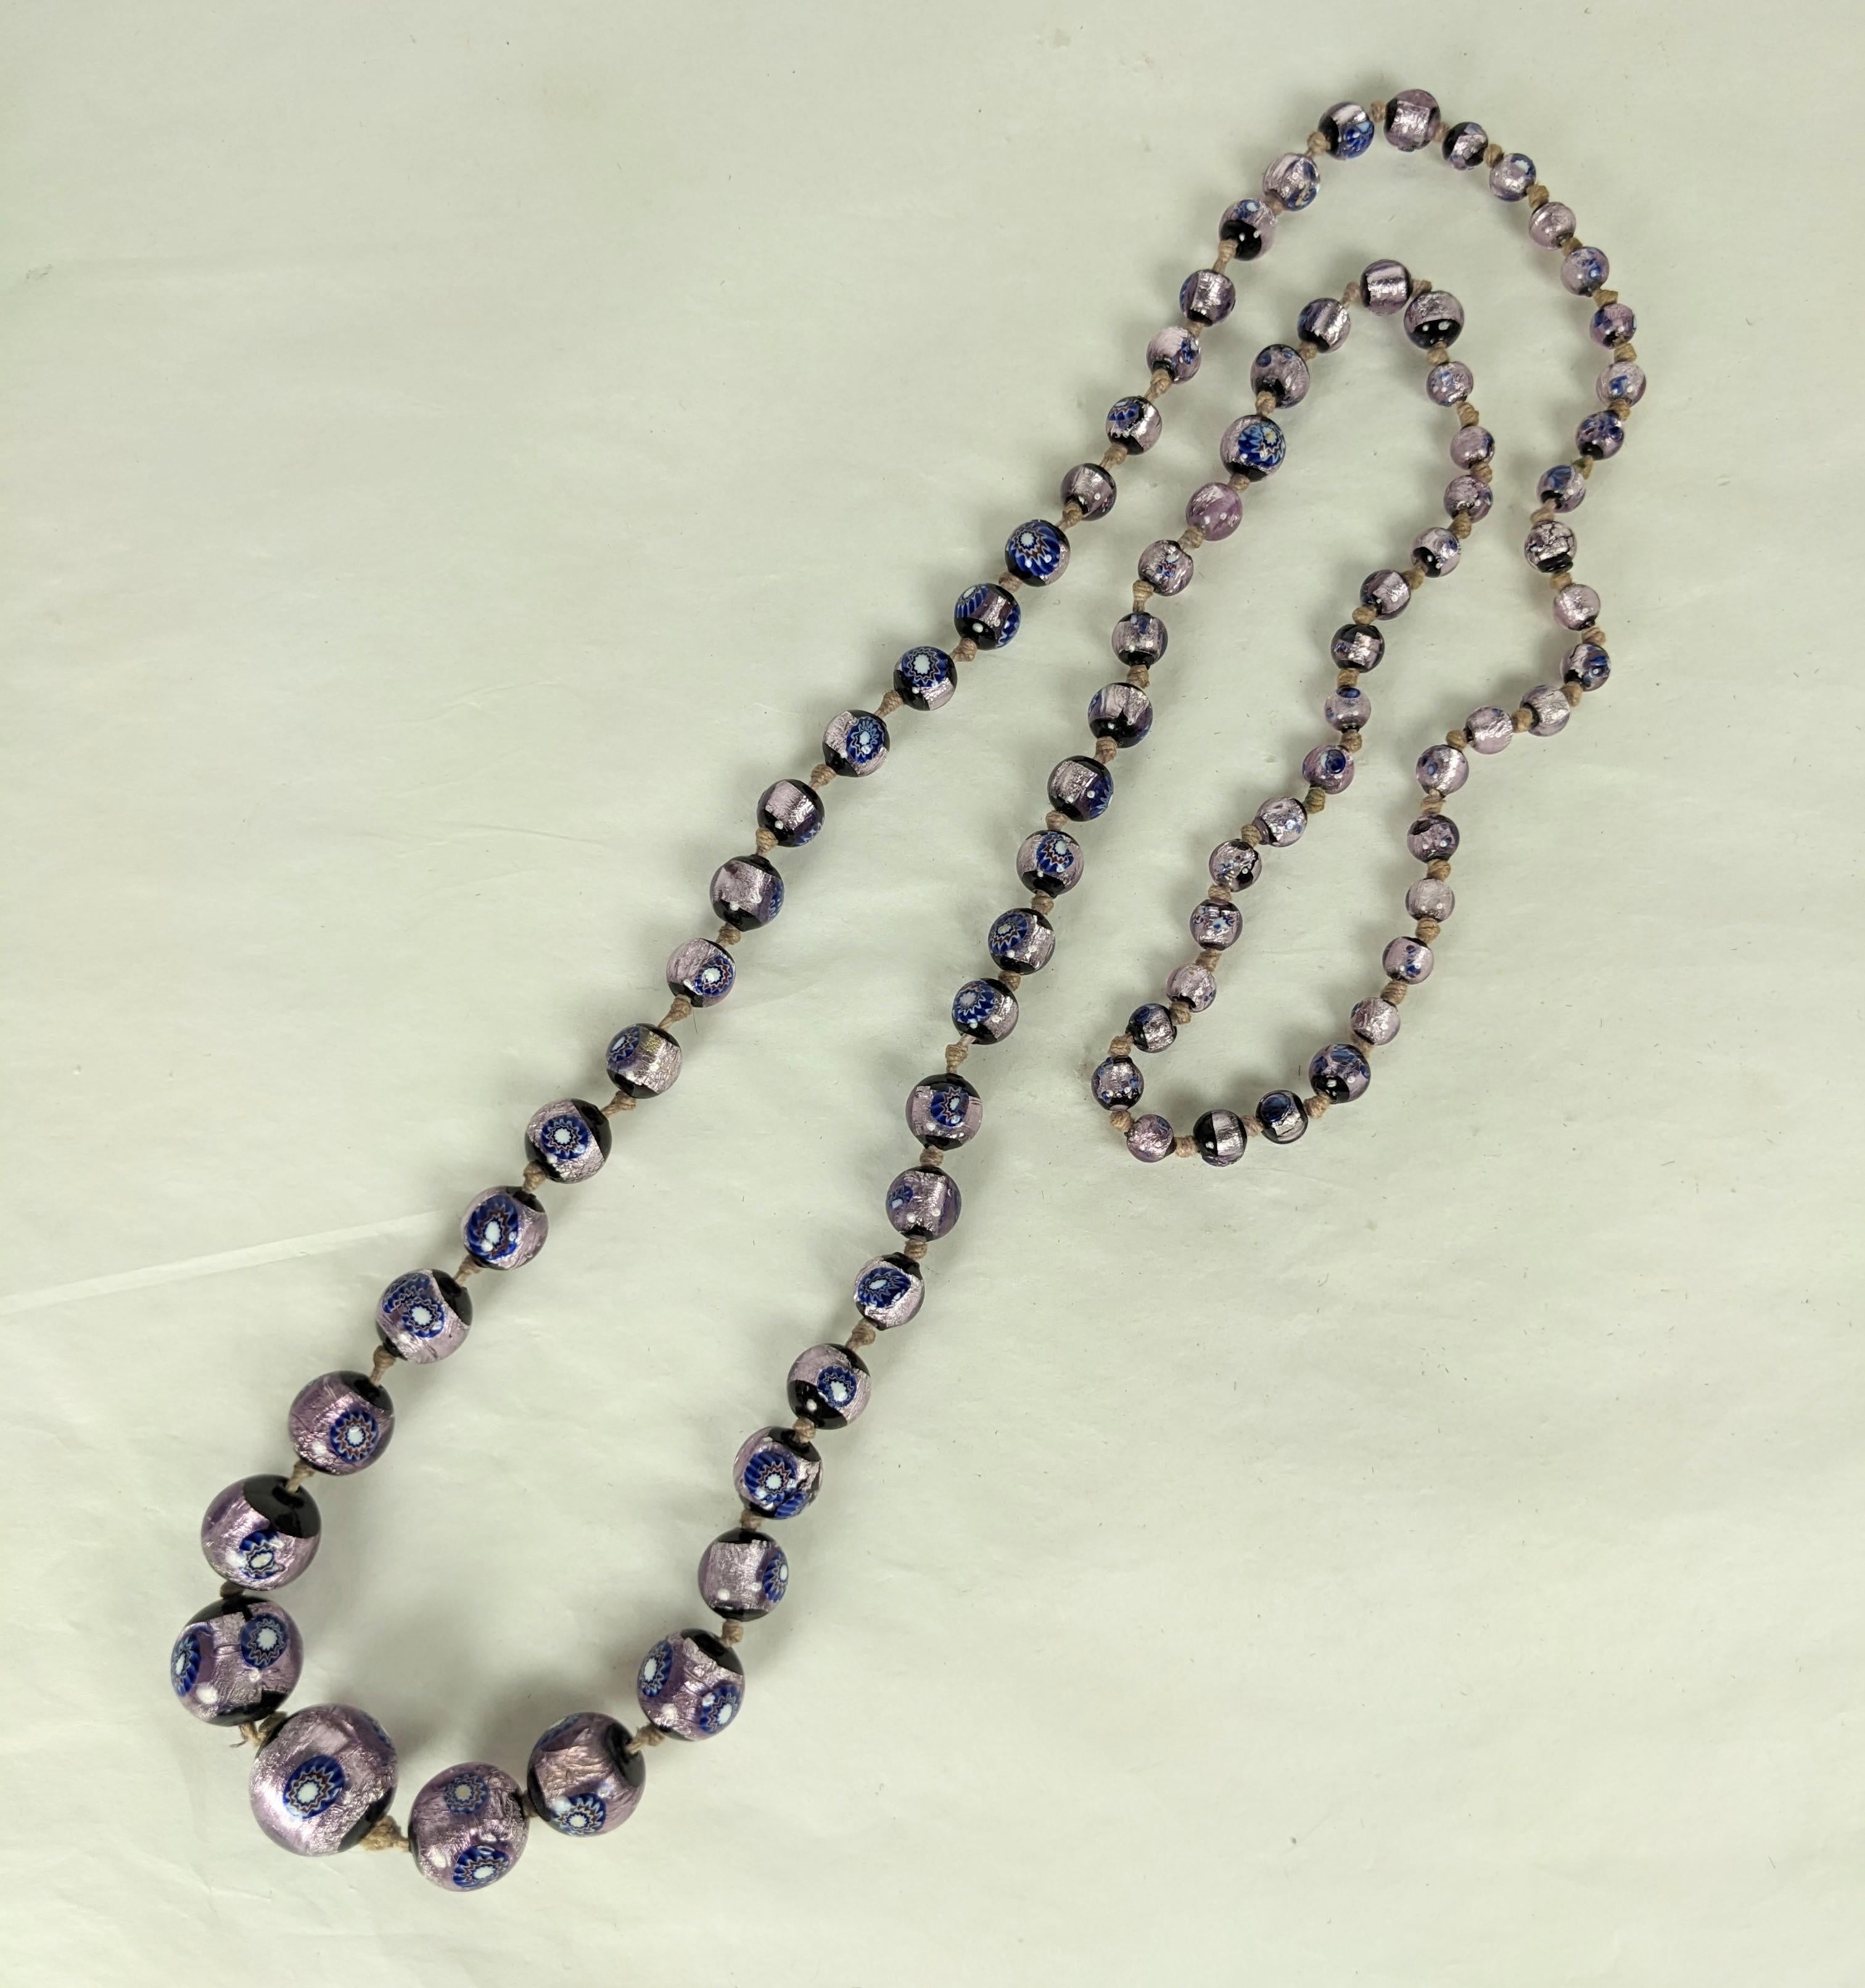 Art Deco Silver Foiled Murano Beads from the 1930's. Graduated and handmade with silvered foil within purple glass and floral murrine. Handmade and hand knotted, lovely quality. 32